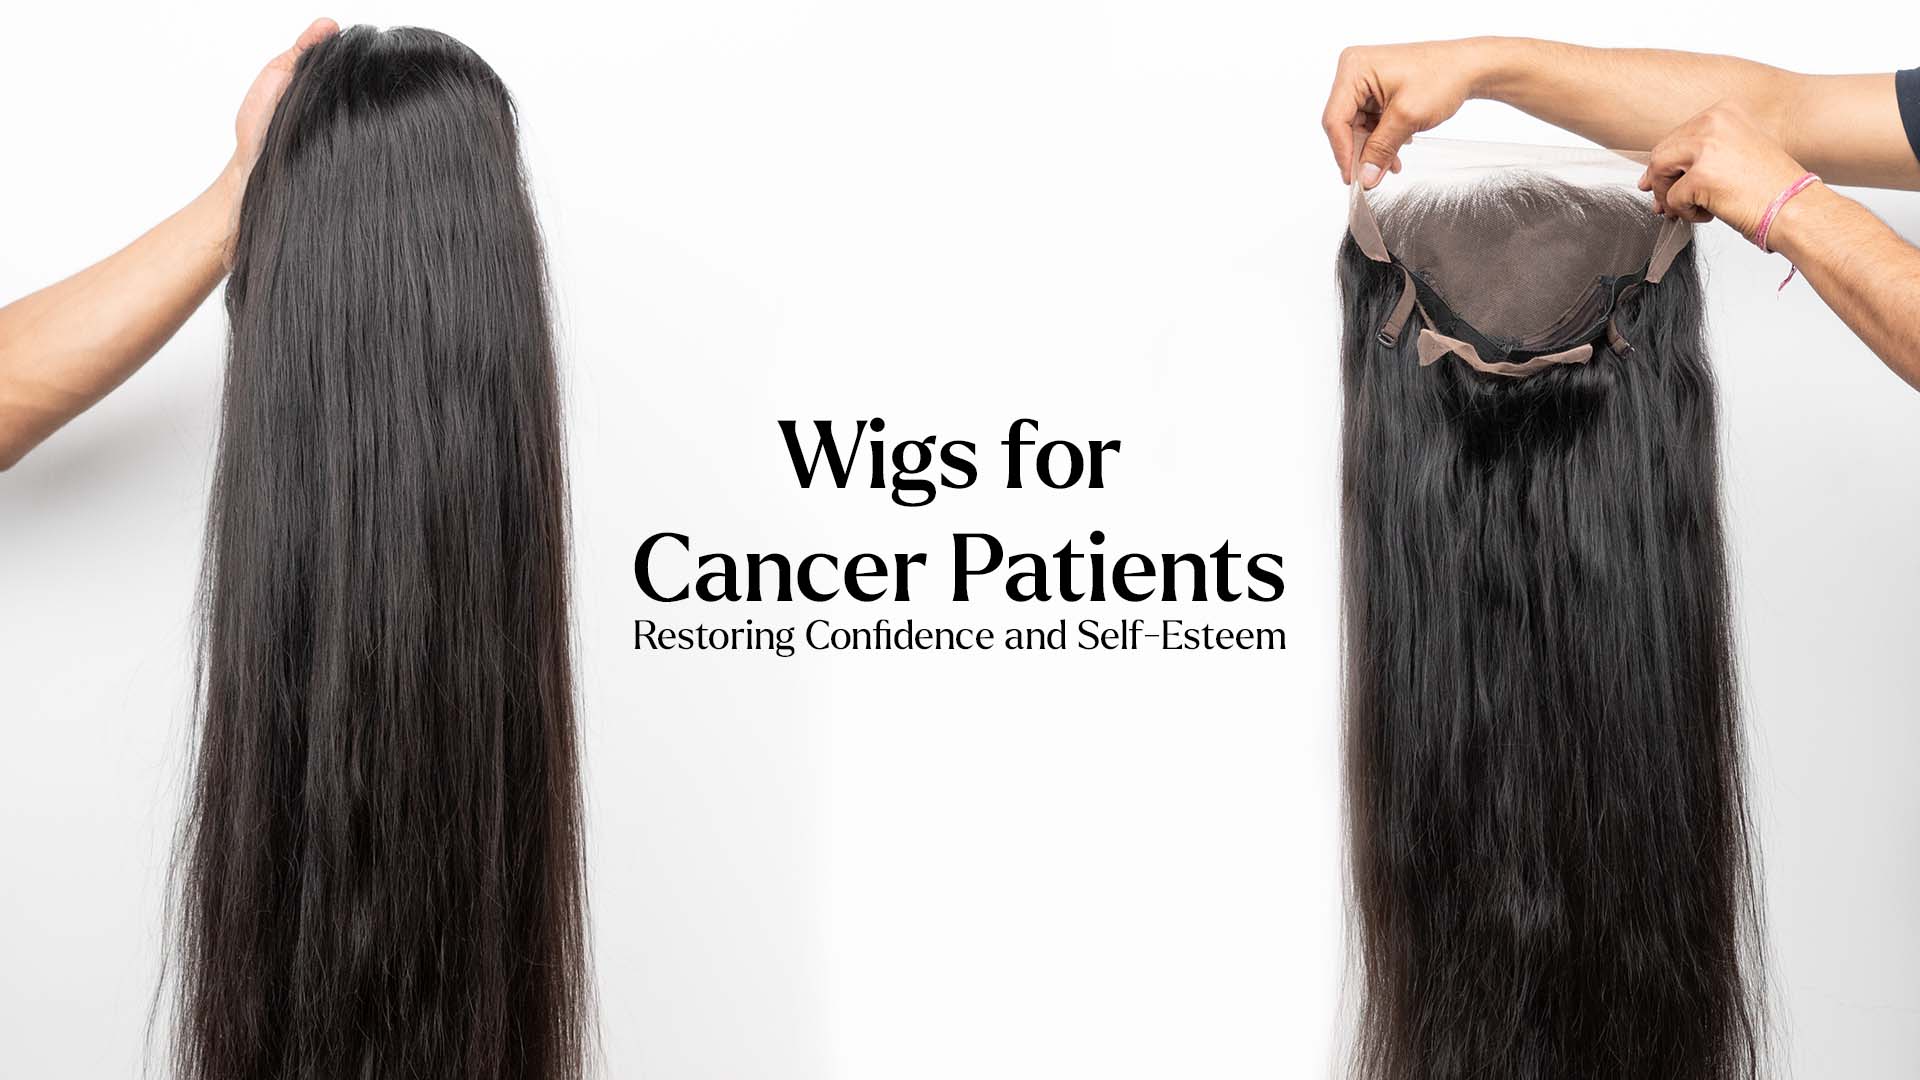 Wigs for Cancer Patients: A Boon in Restoring Confidence and Self-Esteem